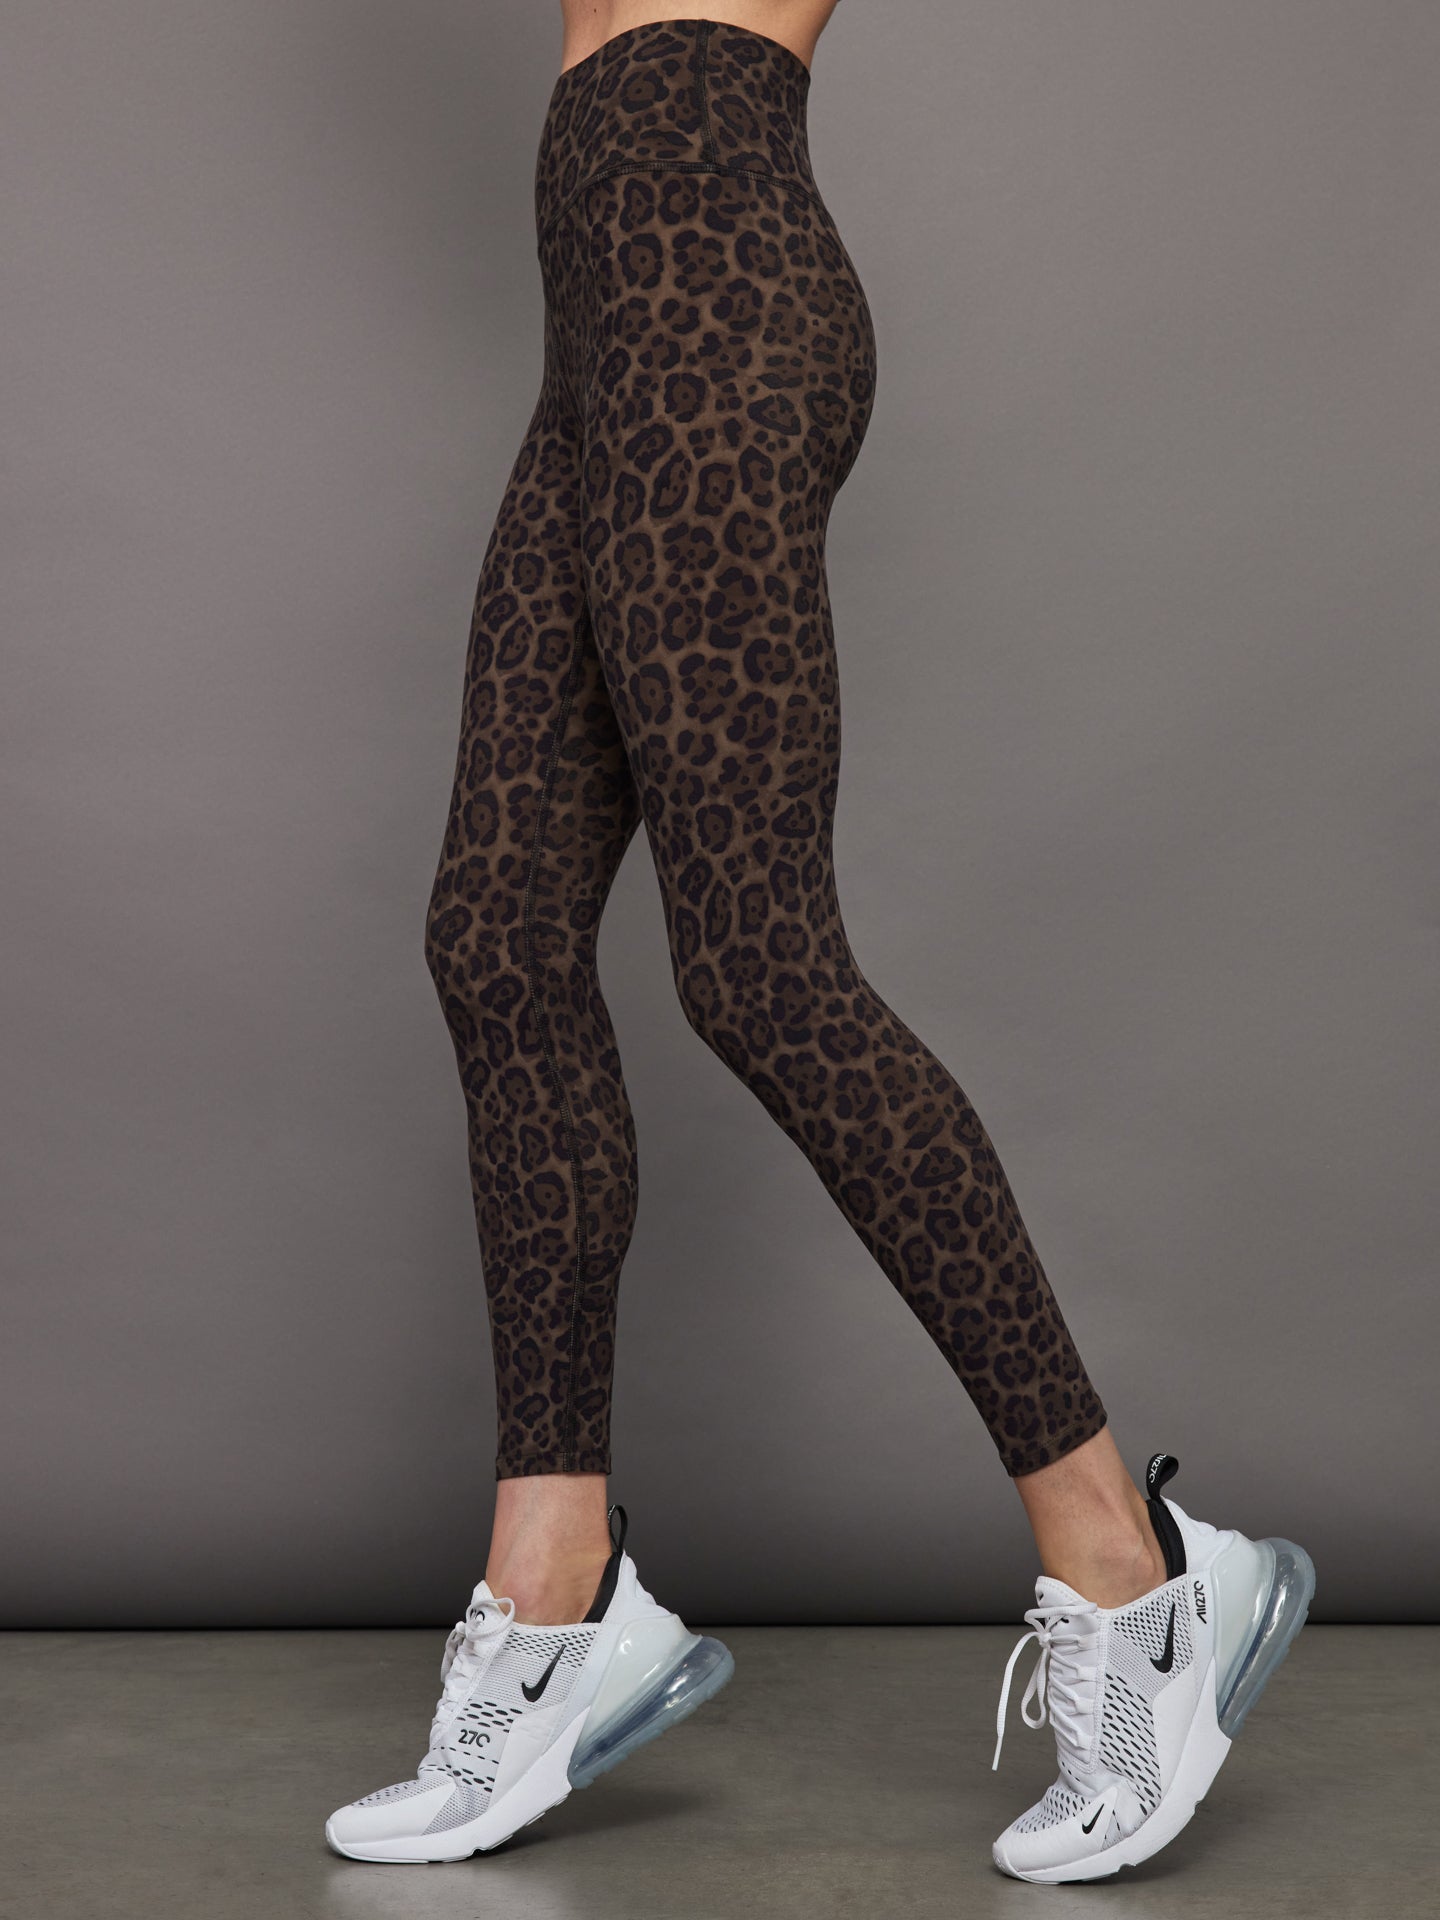 Discover more than 138 leopard print leggings canada latest